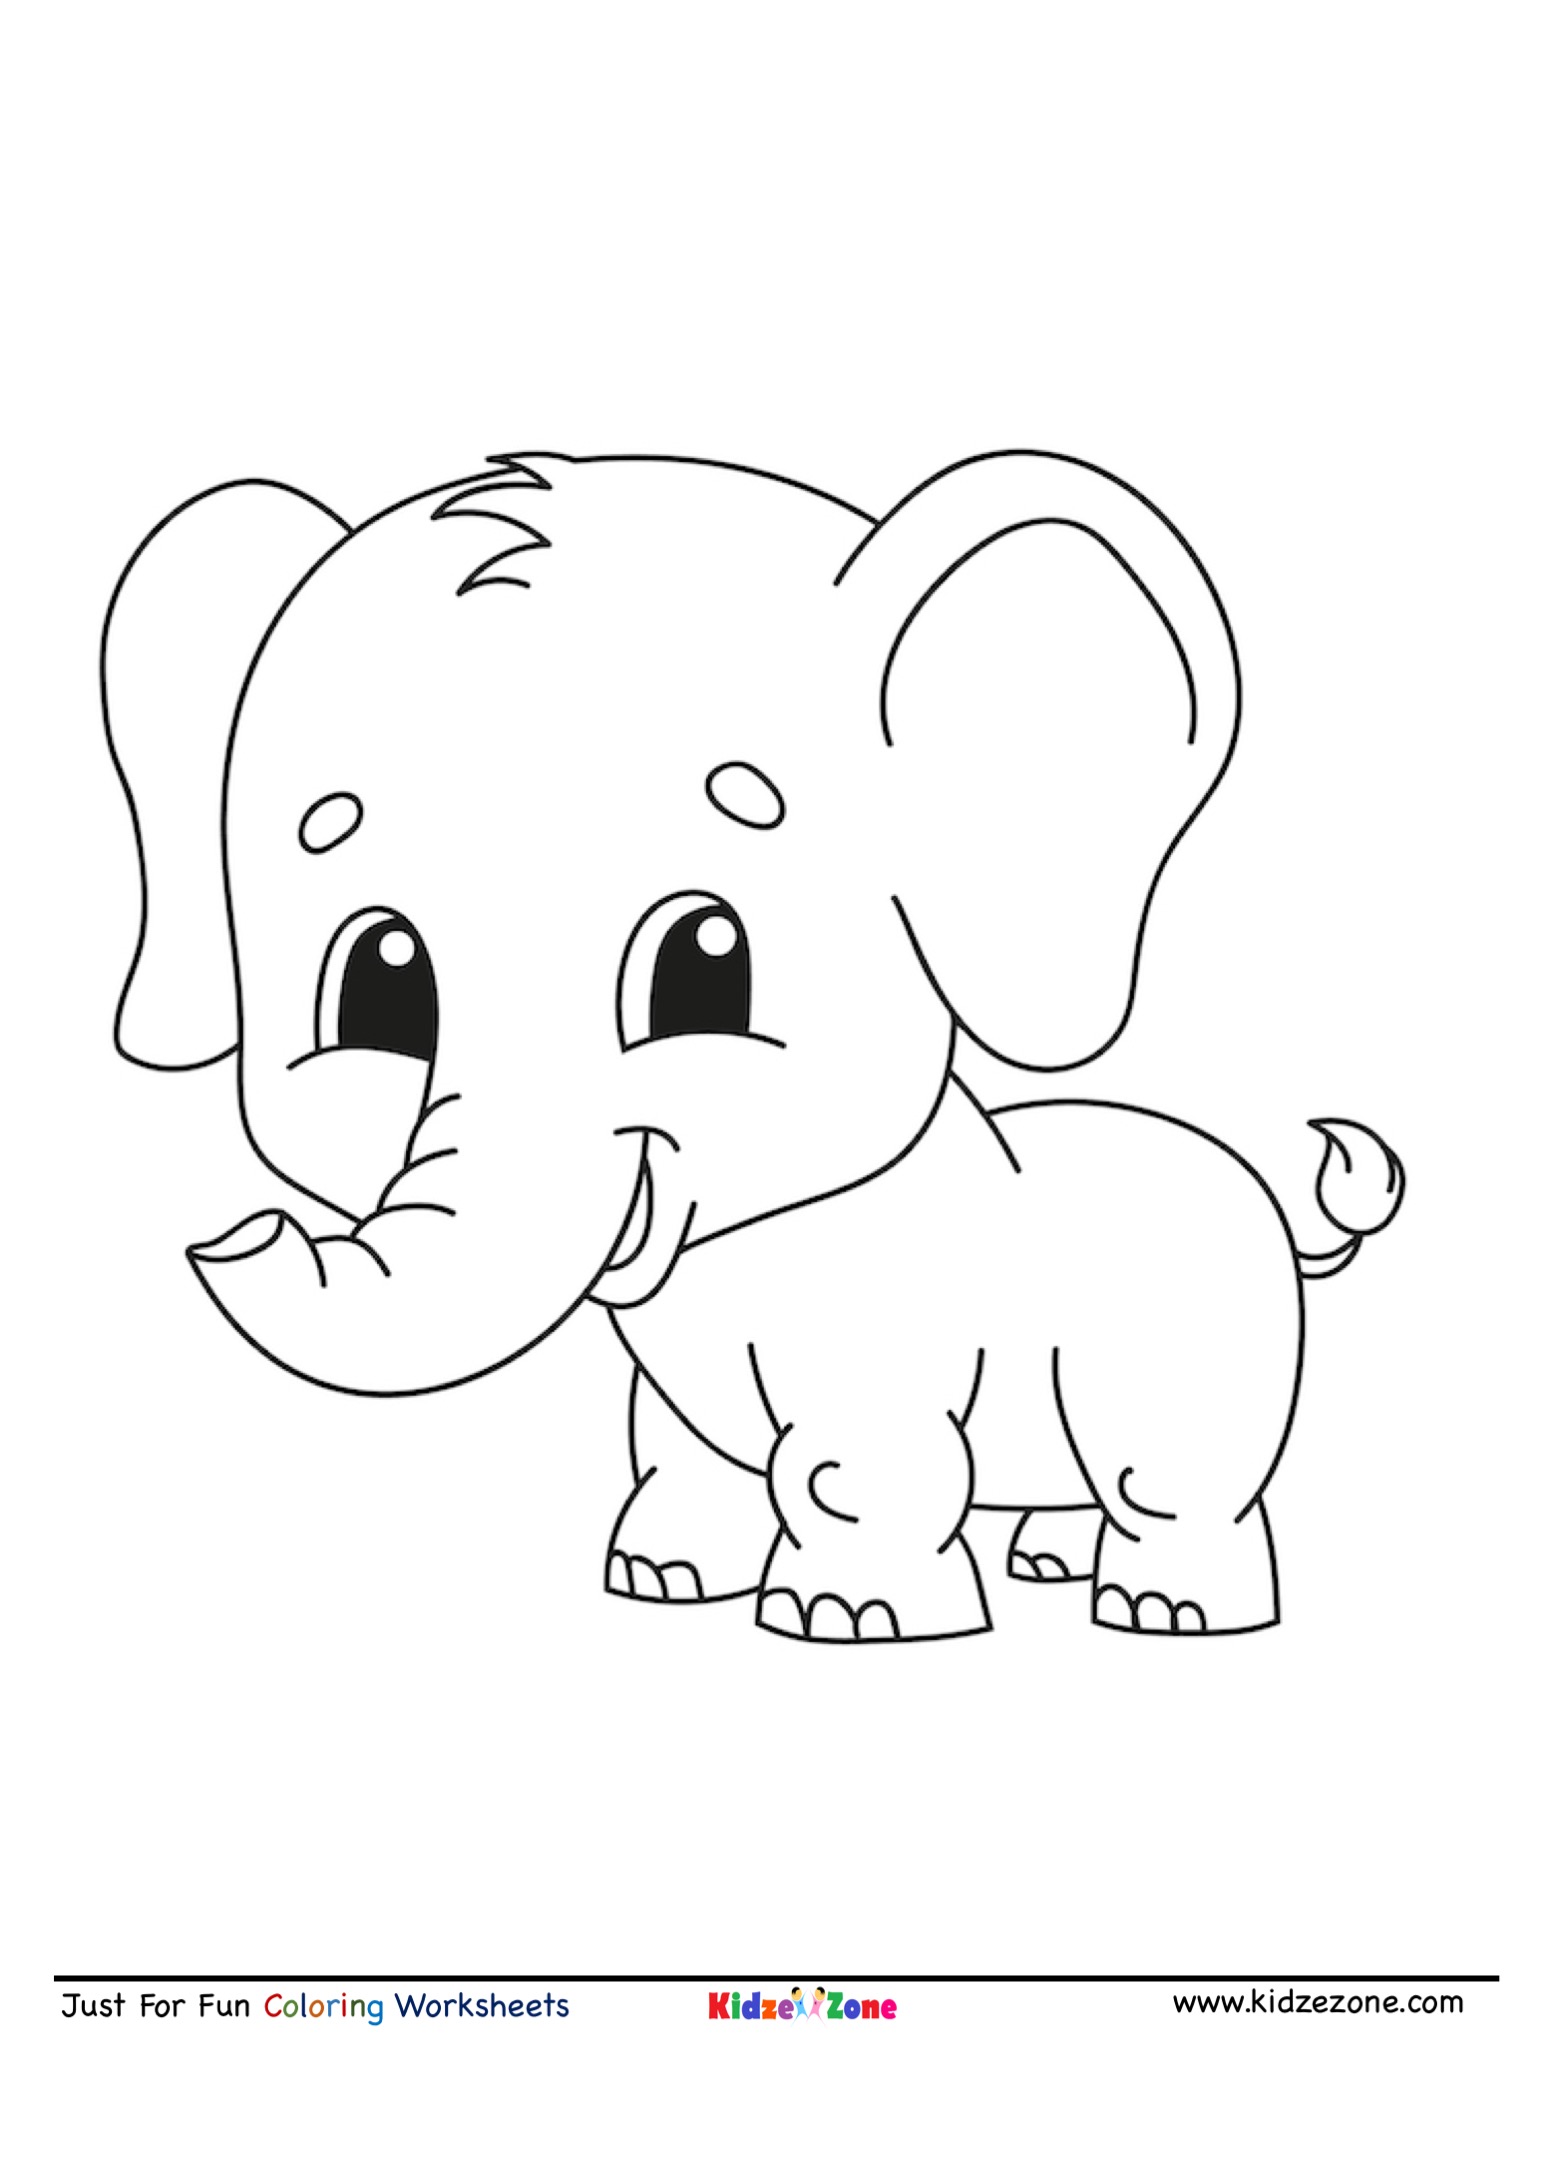 Baby Elephant Cartoon Coloring Page - KidzeZone - Coloring Home